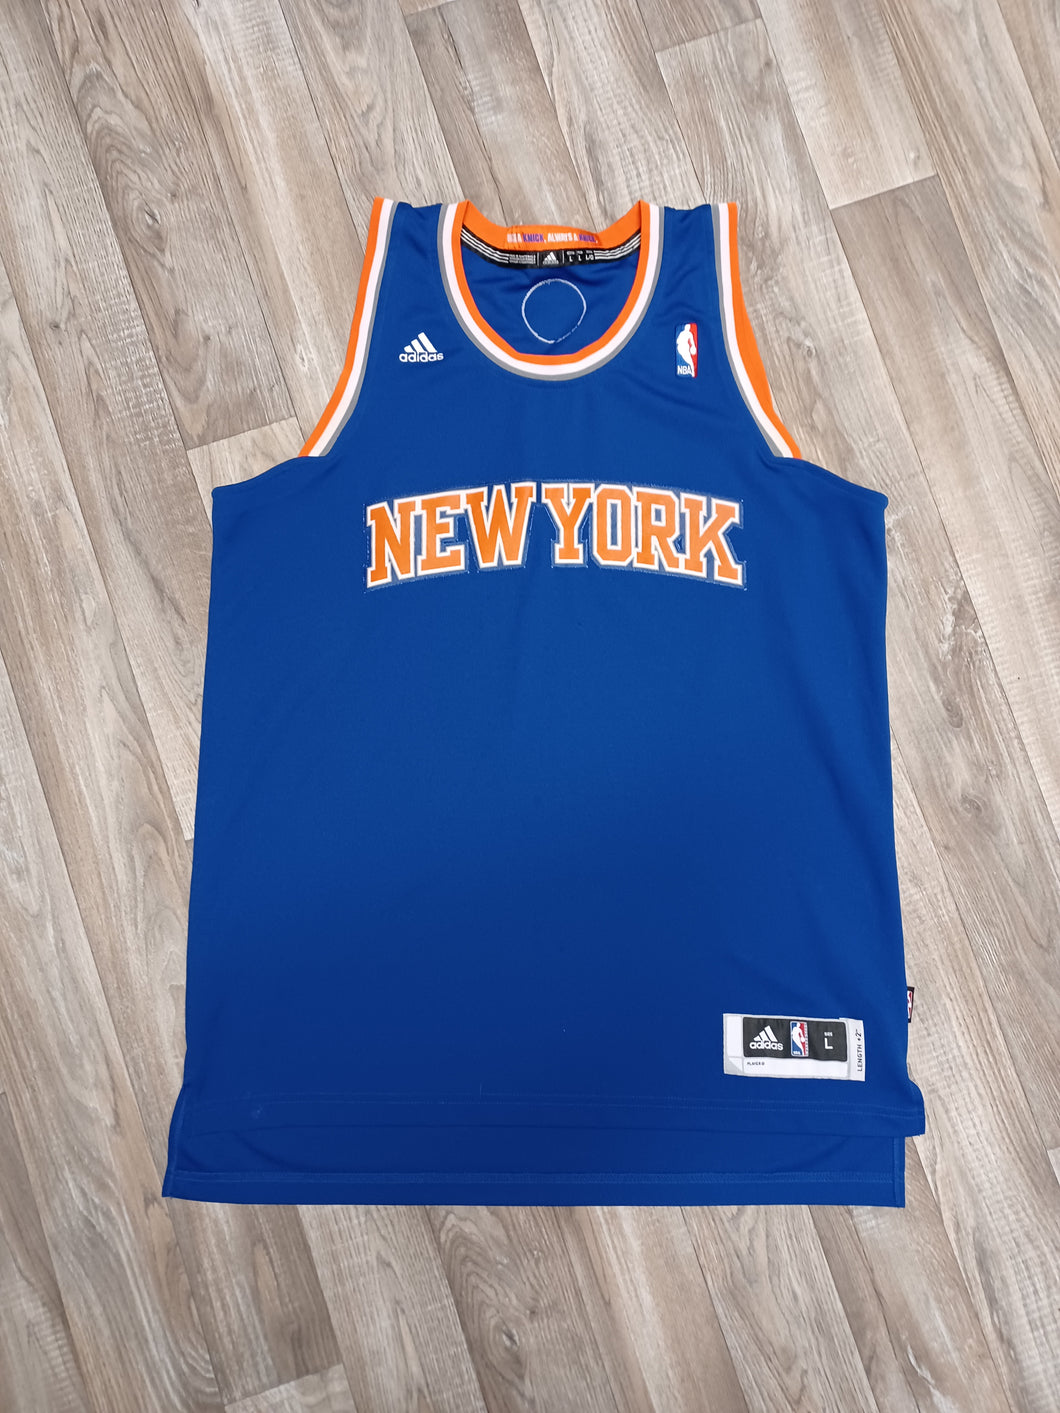 🏀 New York Knicks Blank Jersey Size Large – The Throwback Store 🏀